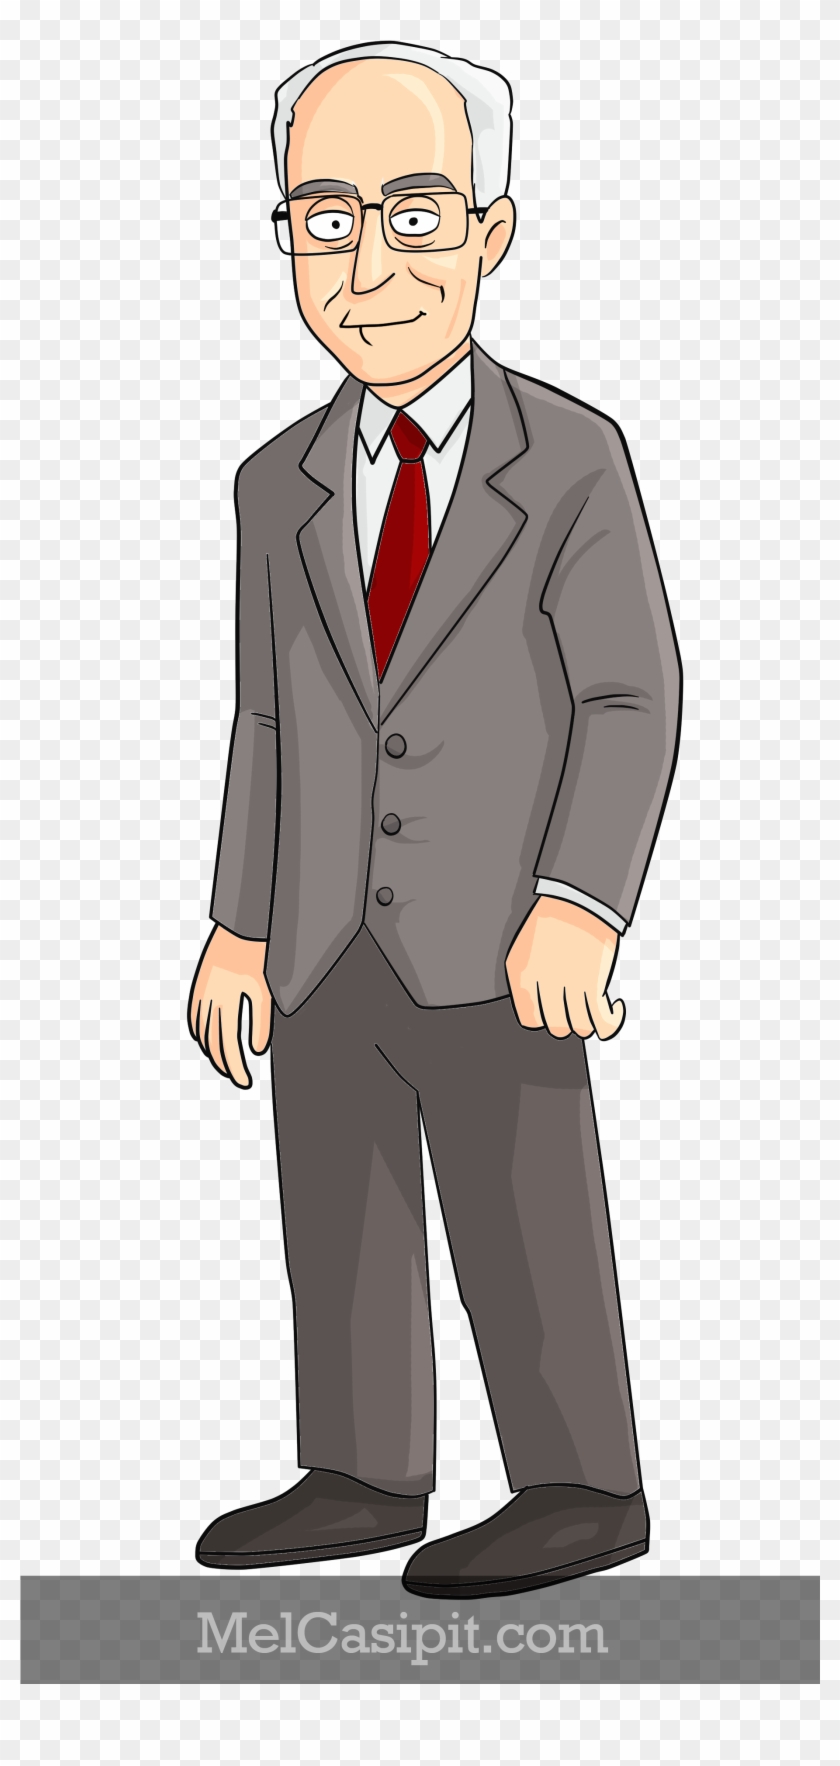 Family Guy Style Gettier For David By Mel Casipit - Tuxedo Clipart #1949151